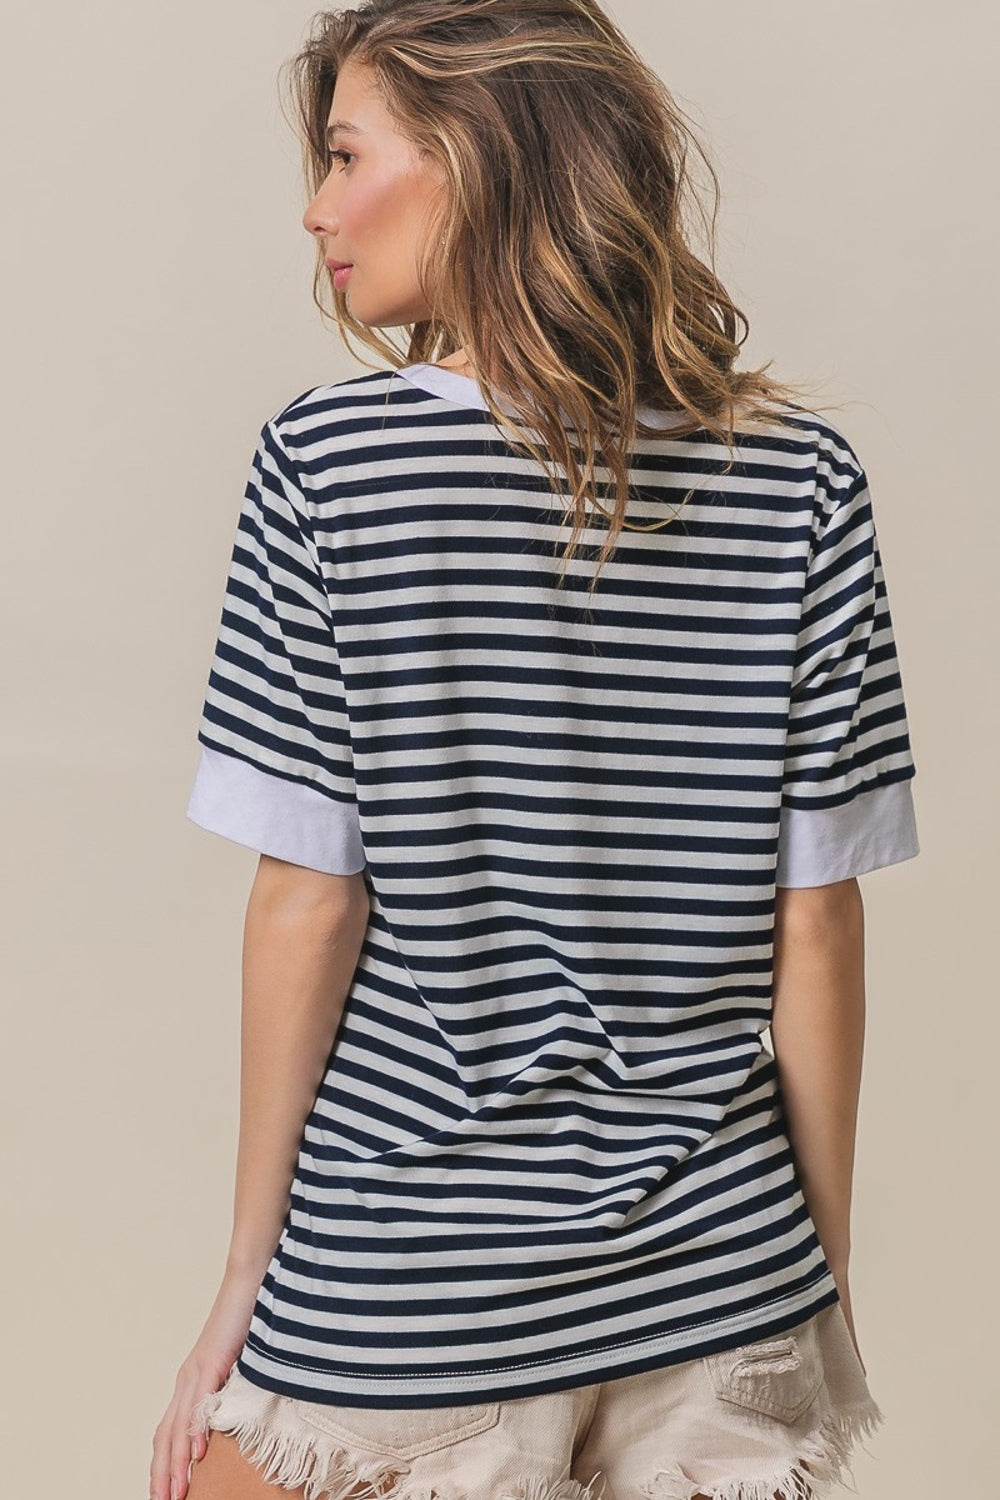 Contrast Striped Notched Knit Top